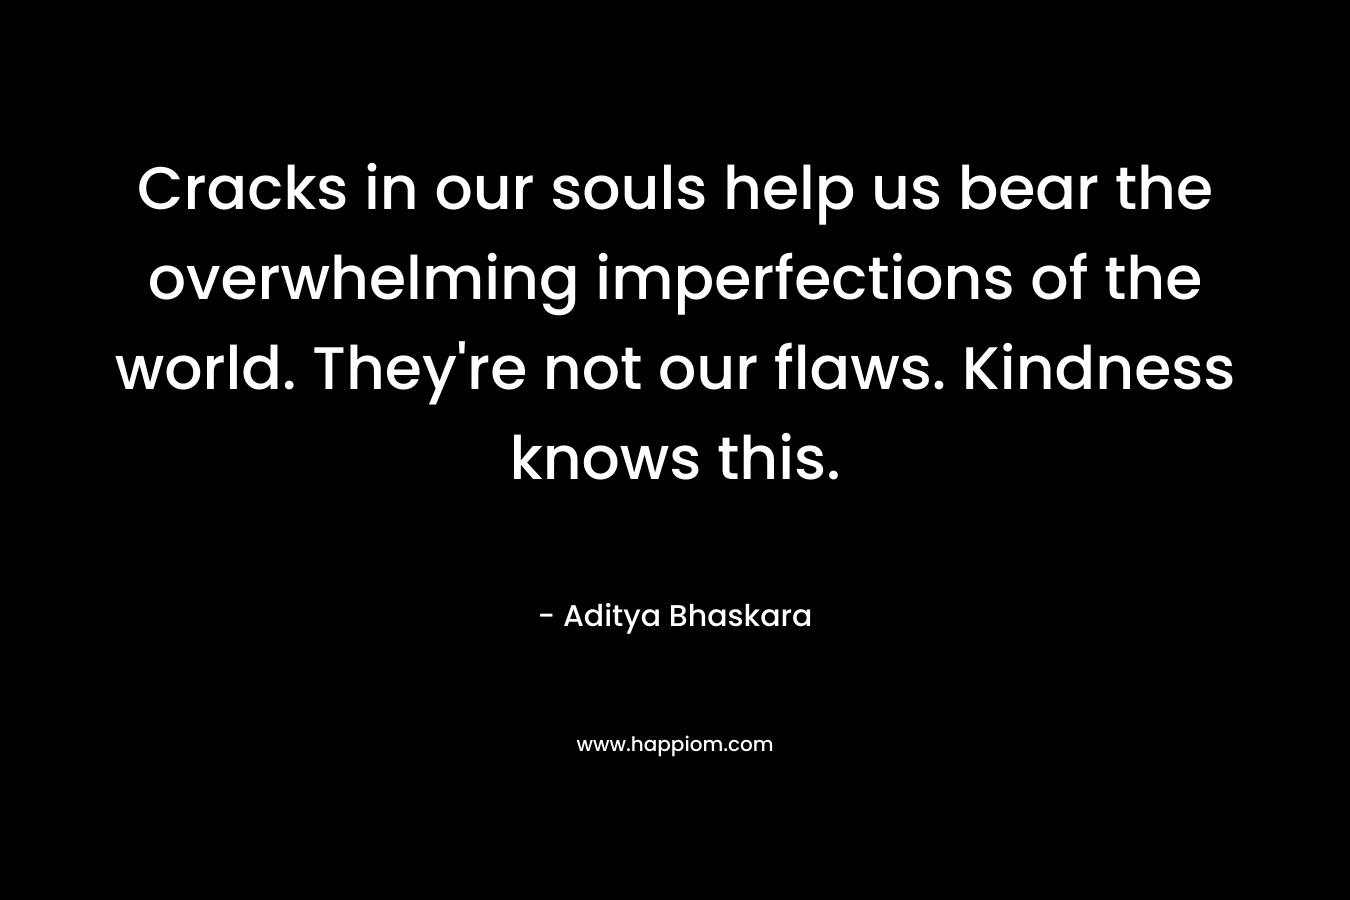 Cracks in our souls help us bear the overwhelming imperfections of the world. They’re not our flaws. Kindness knows this. – Aditya Bhaskara